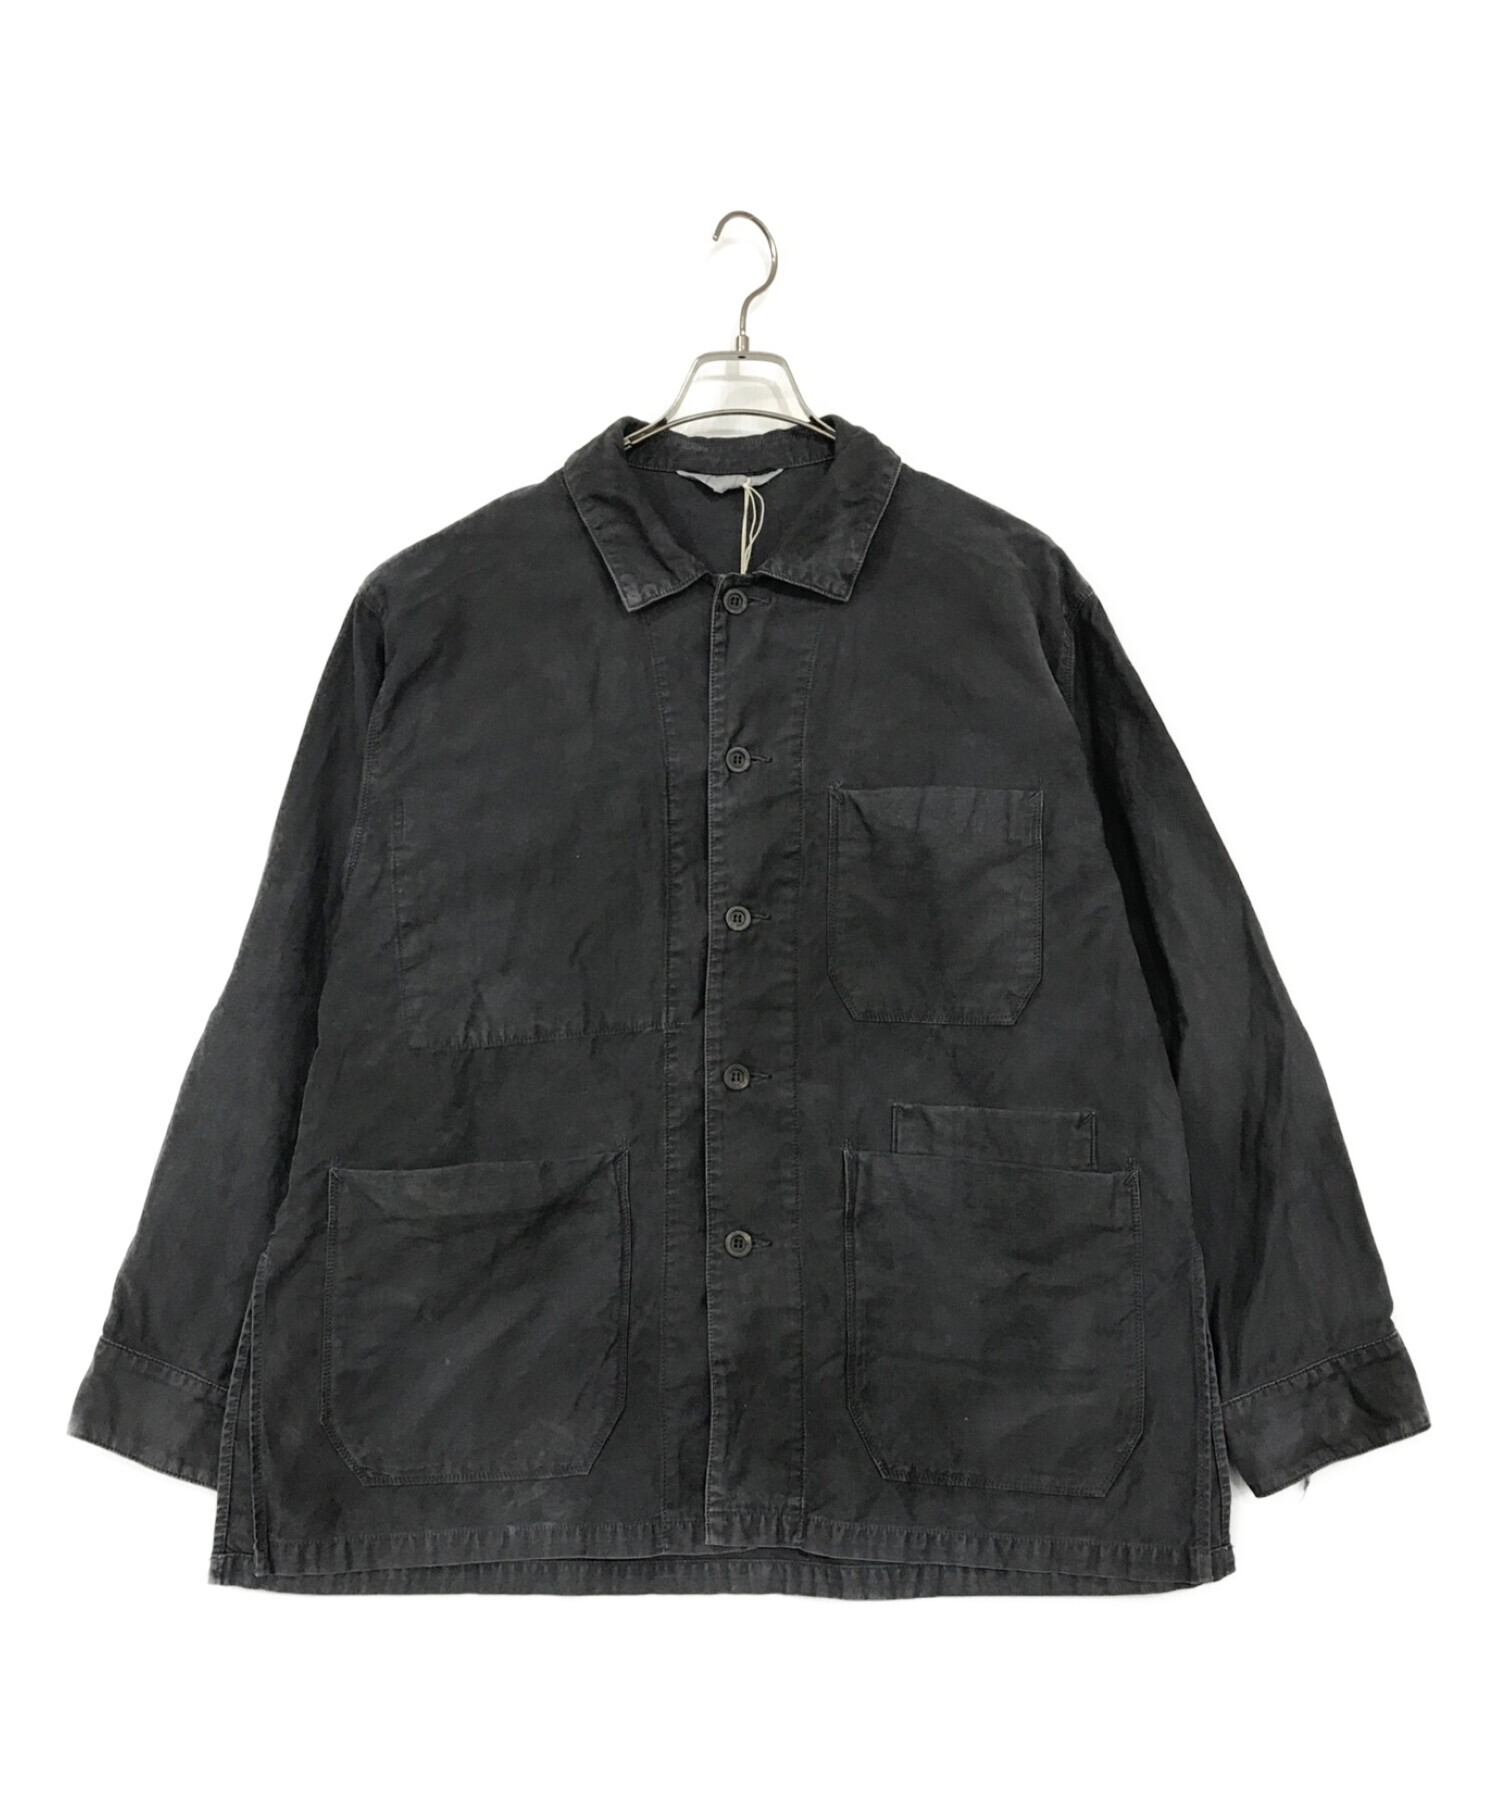 ANCELLM 22AW MOLESKIN COVERALL JACKET